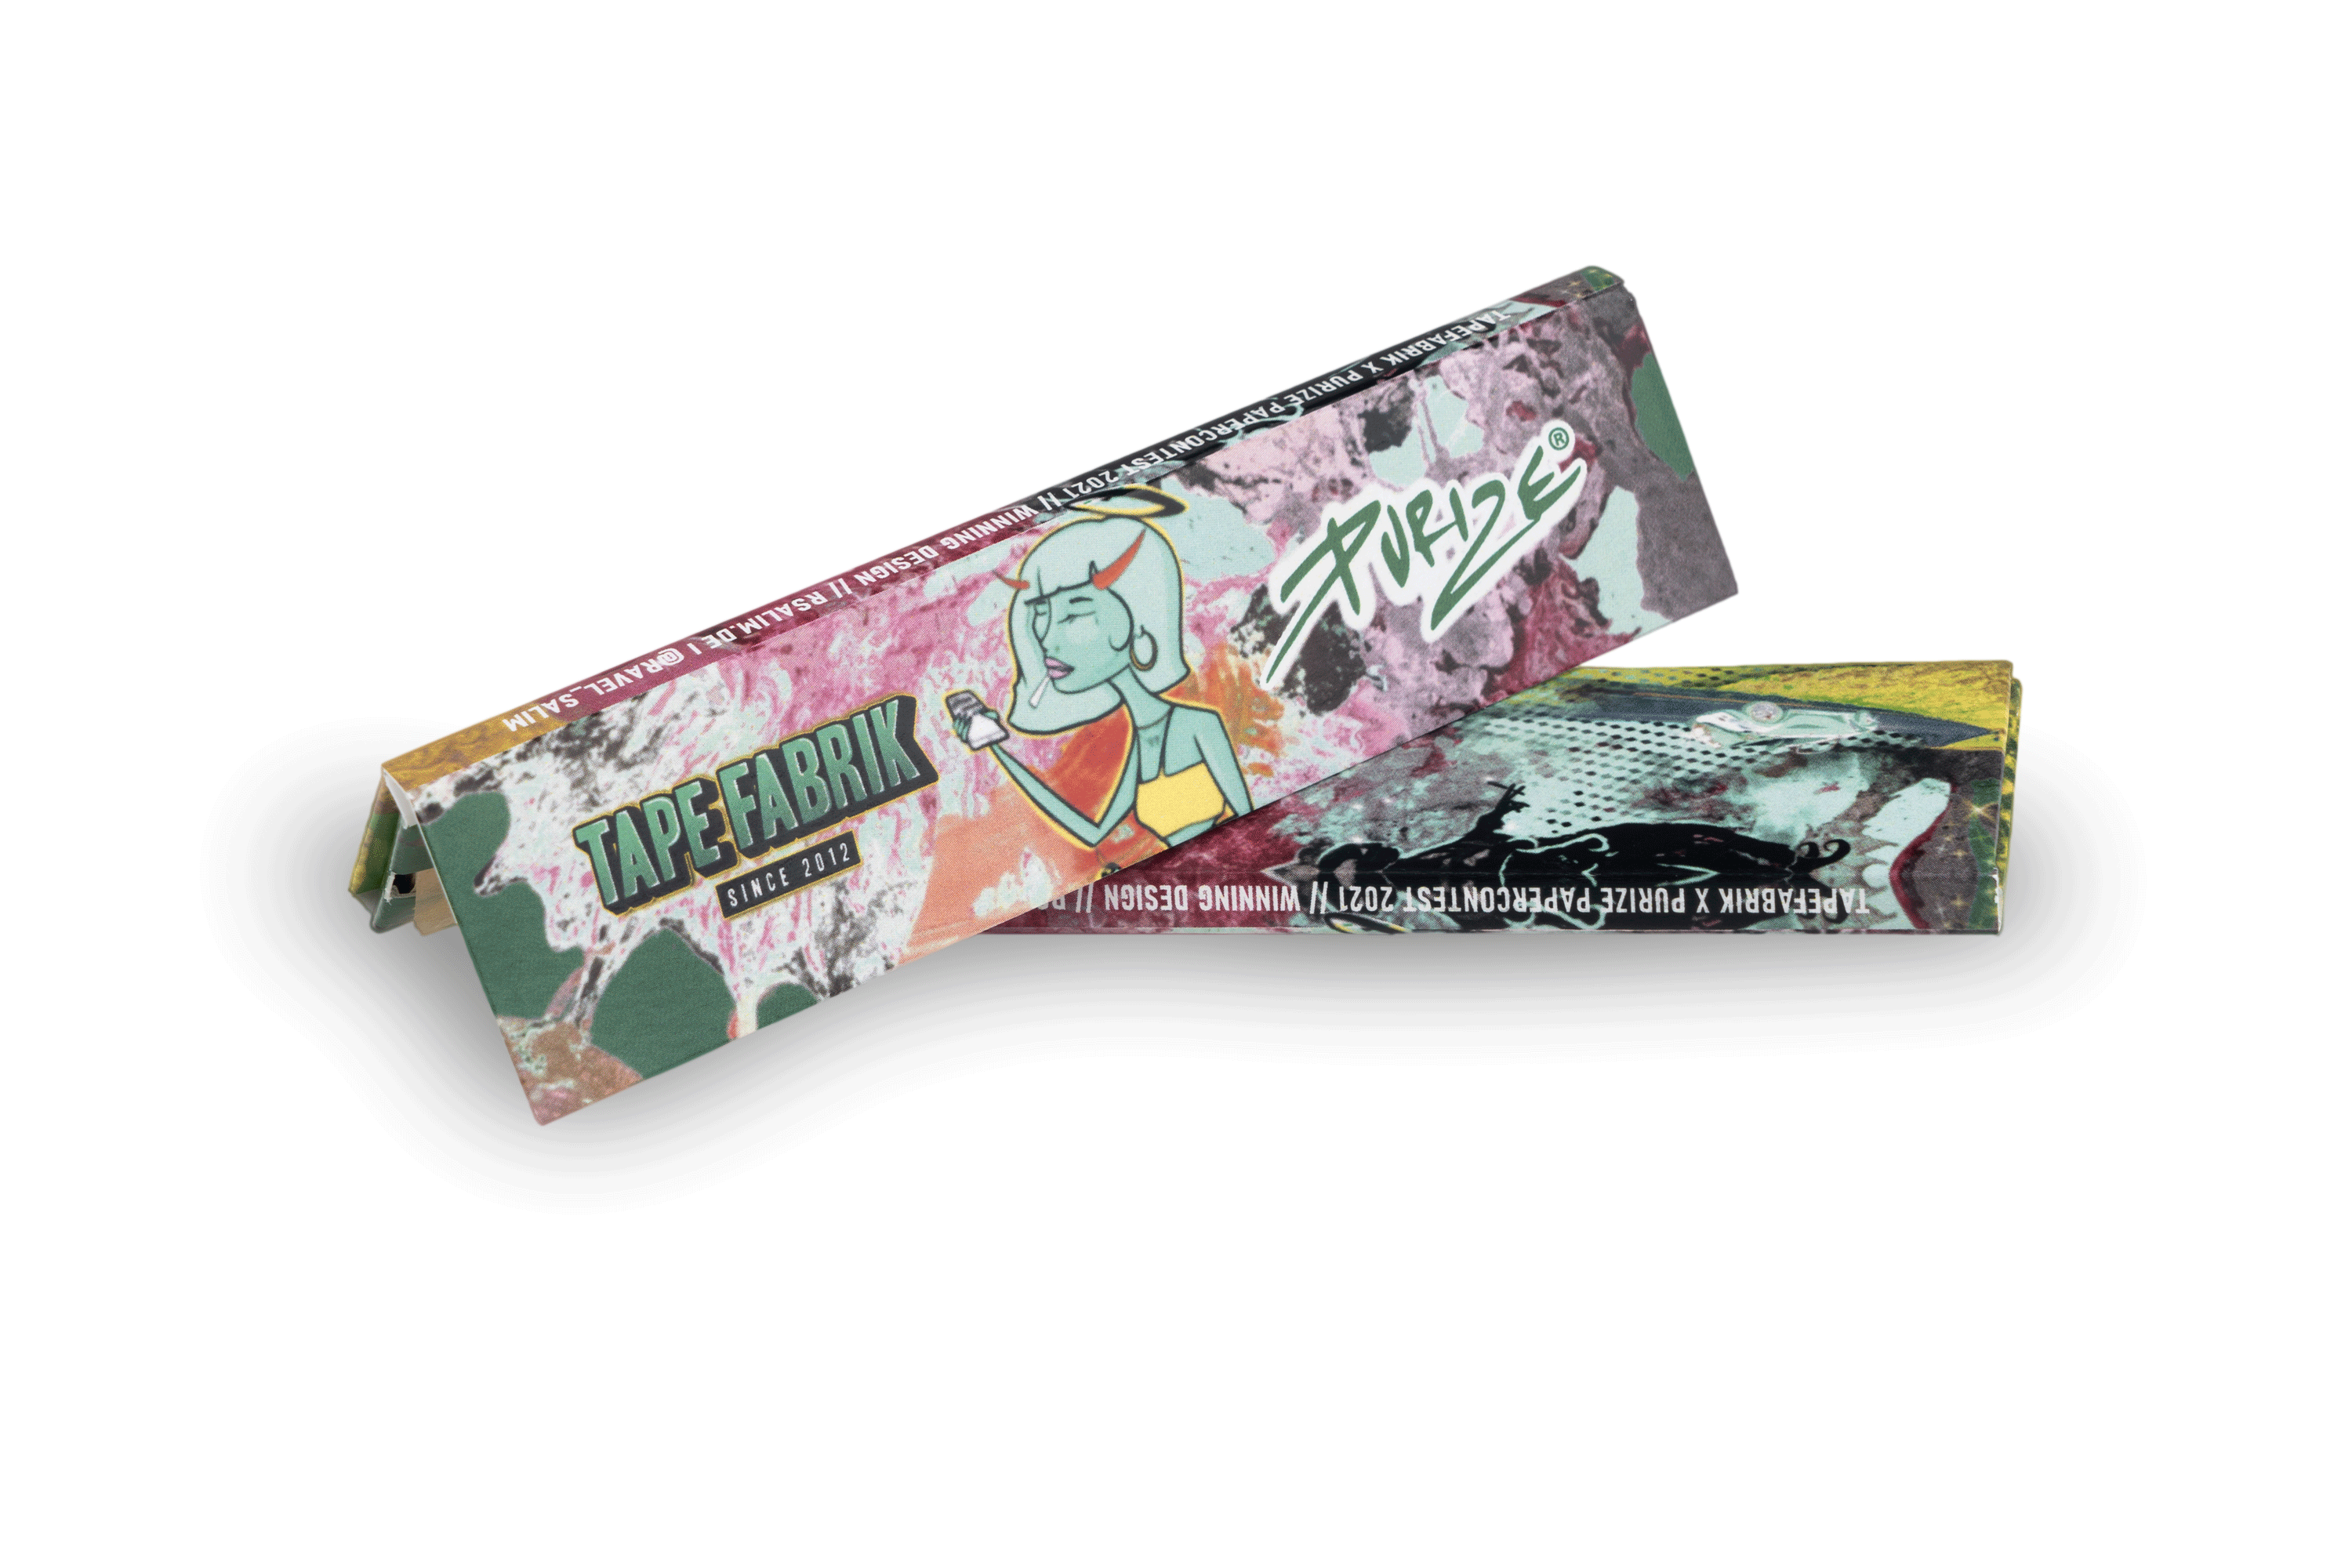 PURIZE® x TAPEFABRIK King Size Slim Papers